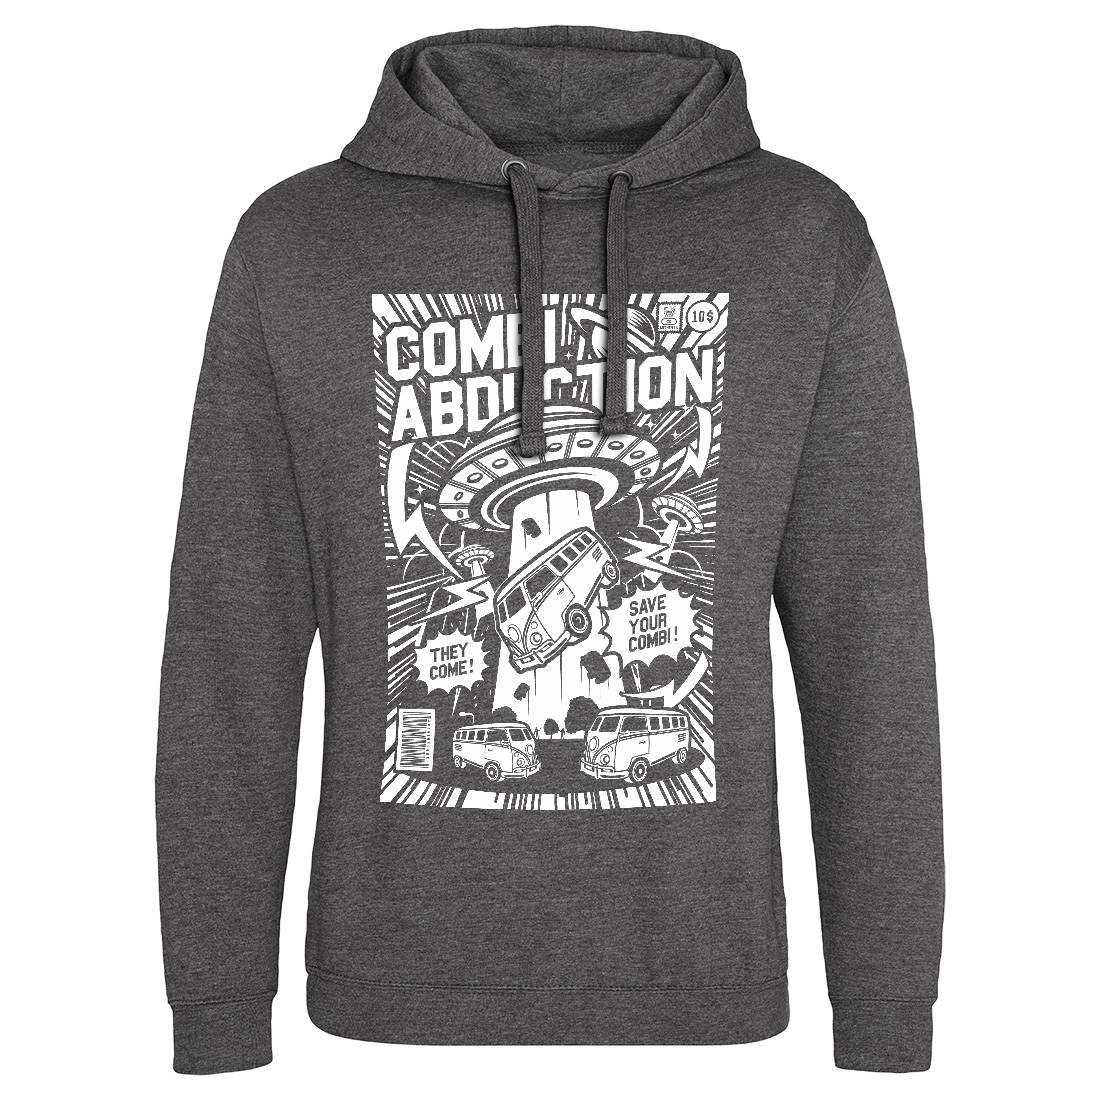 Combi Abduction Mens Hoodie Without Pocket Space A220